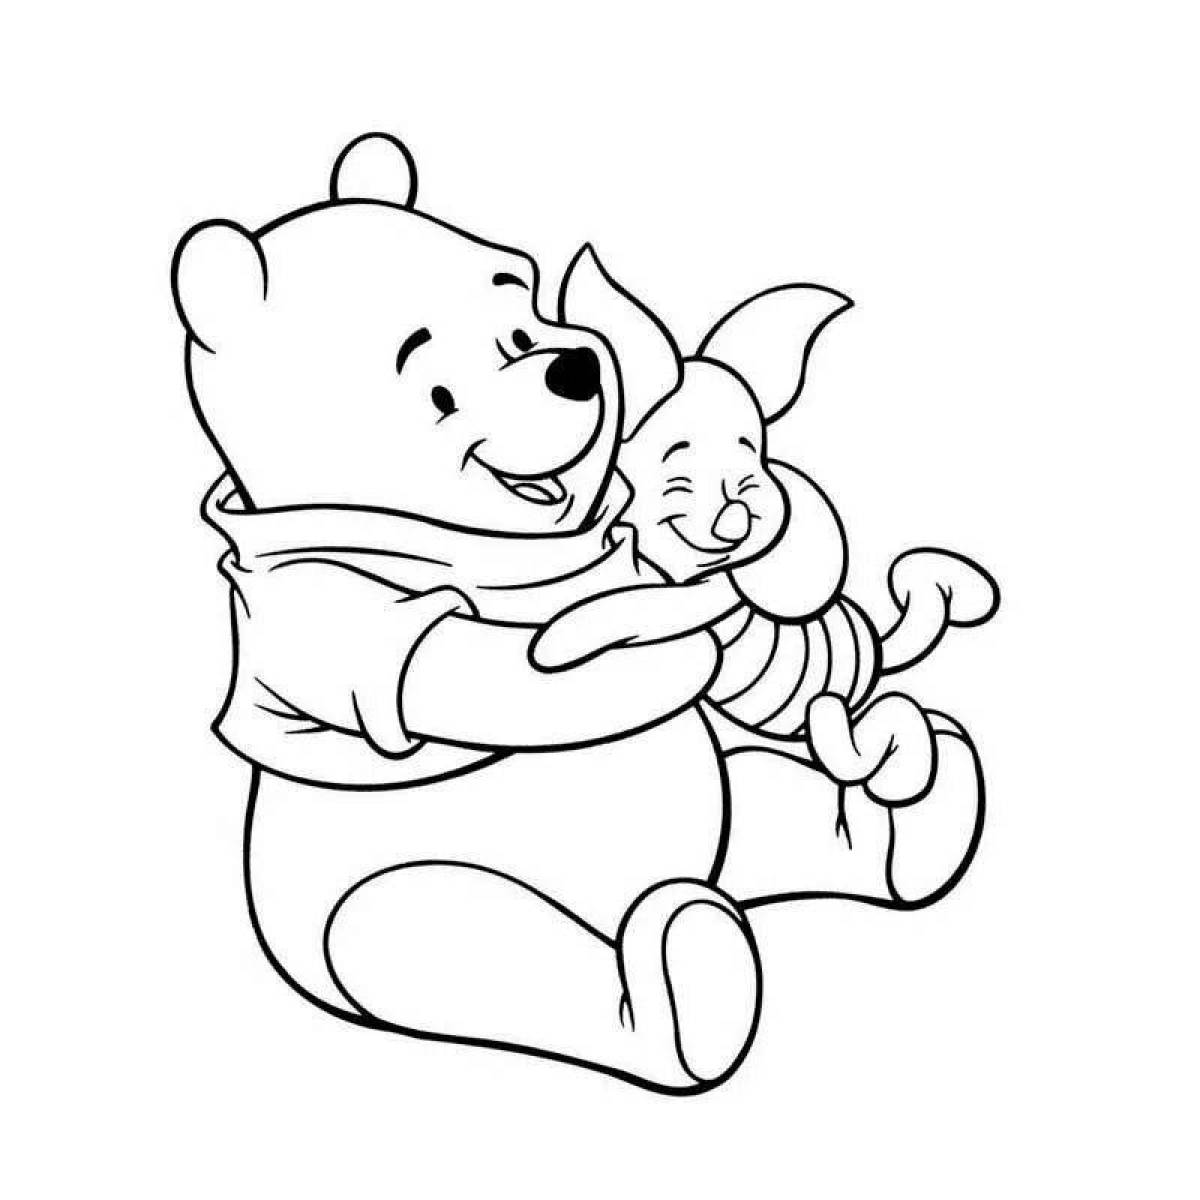 Gentle Winnie the Pooh and Piglet coloring